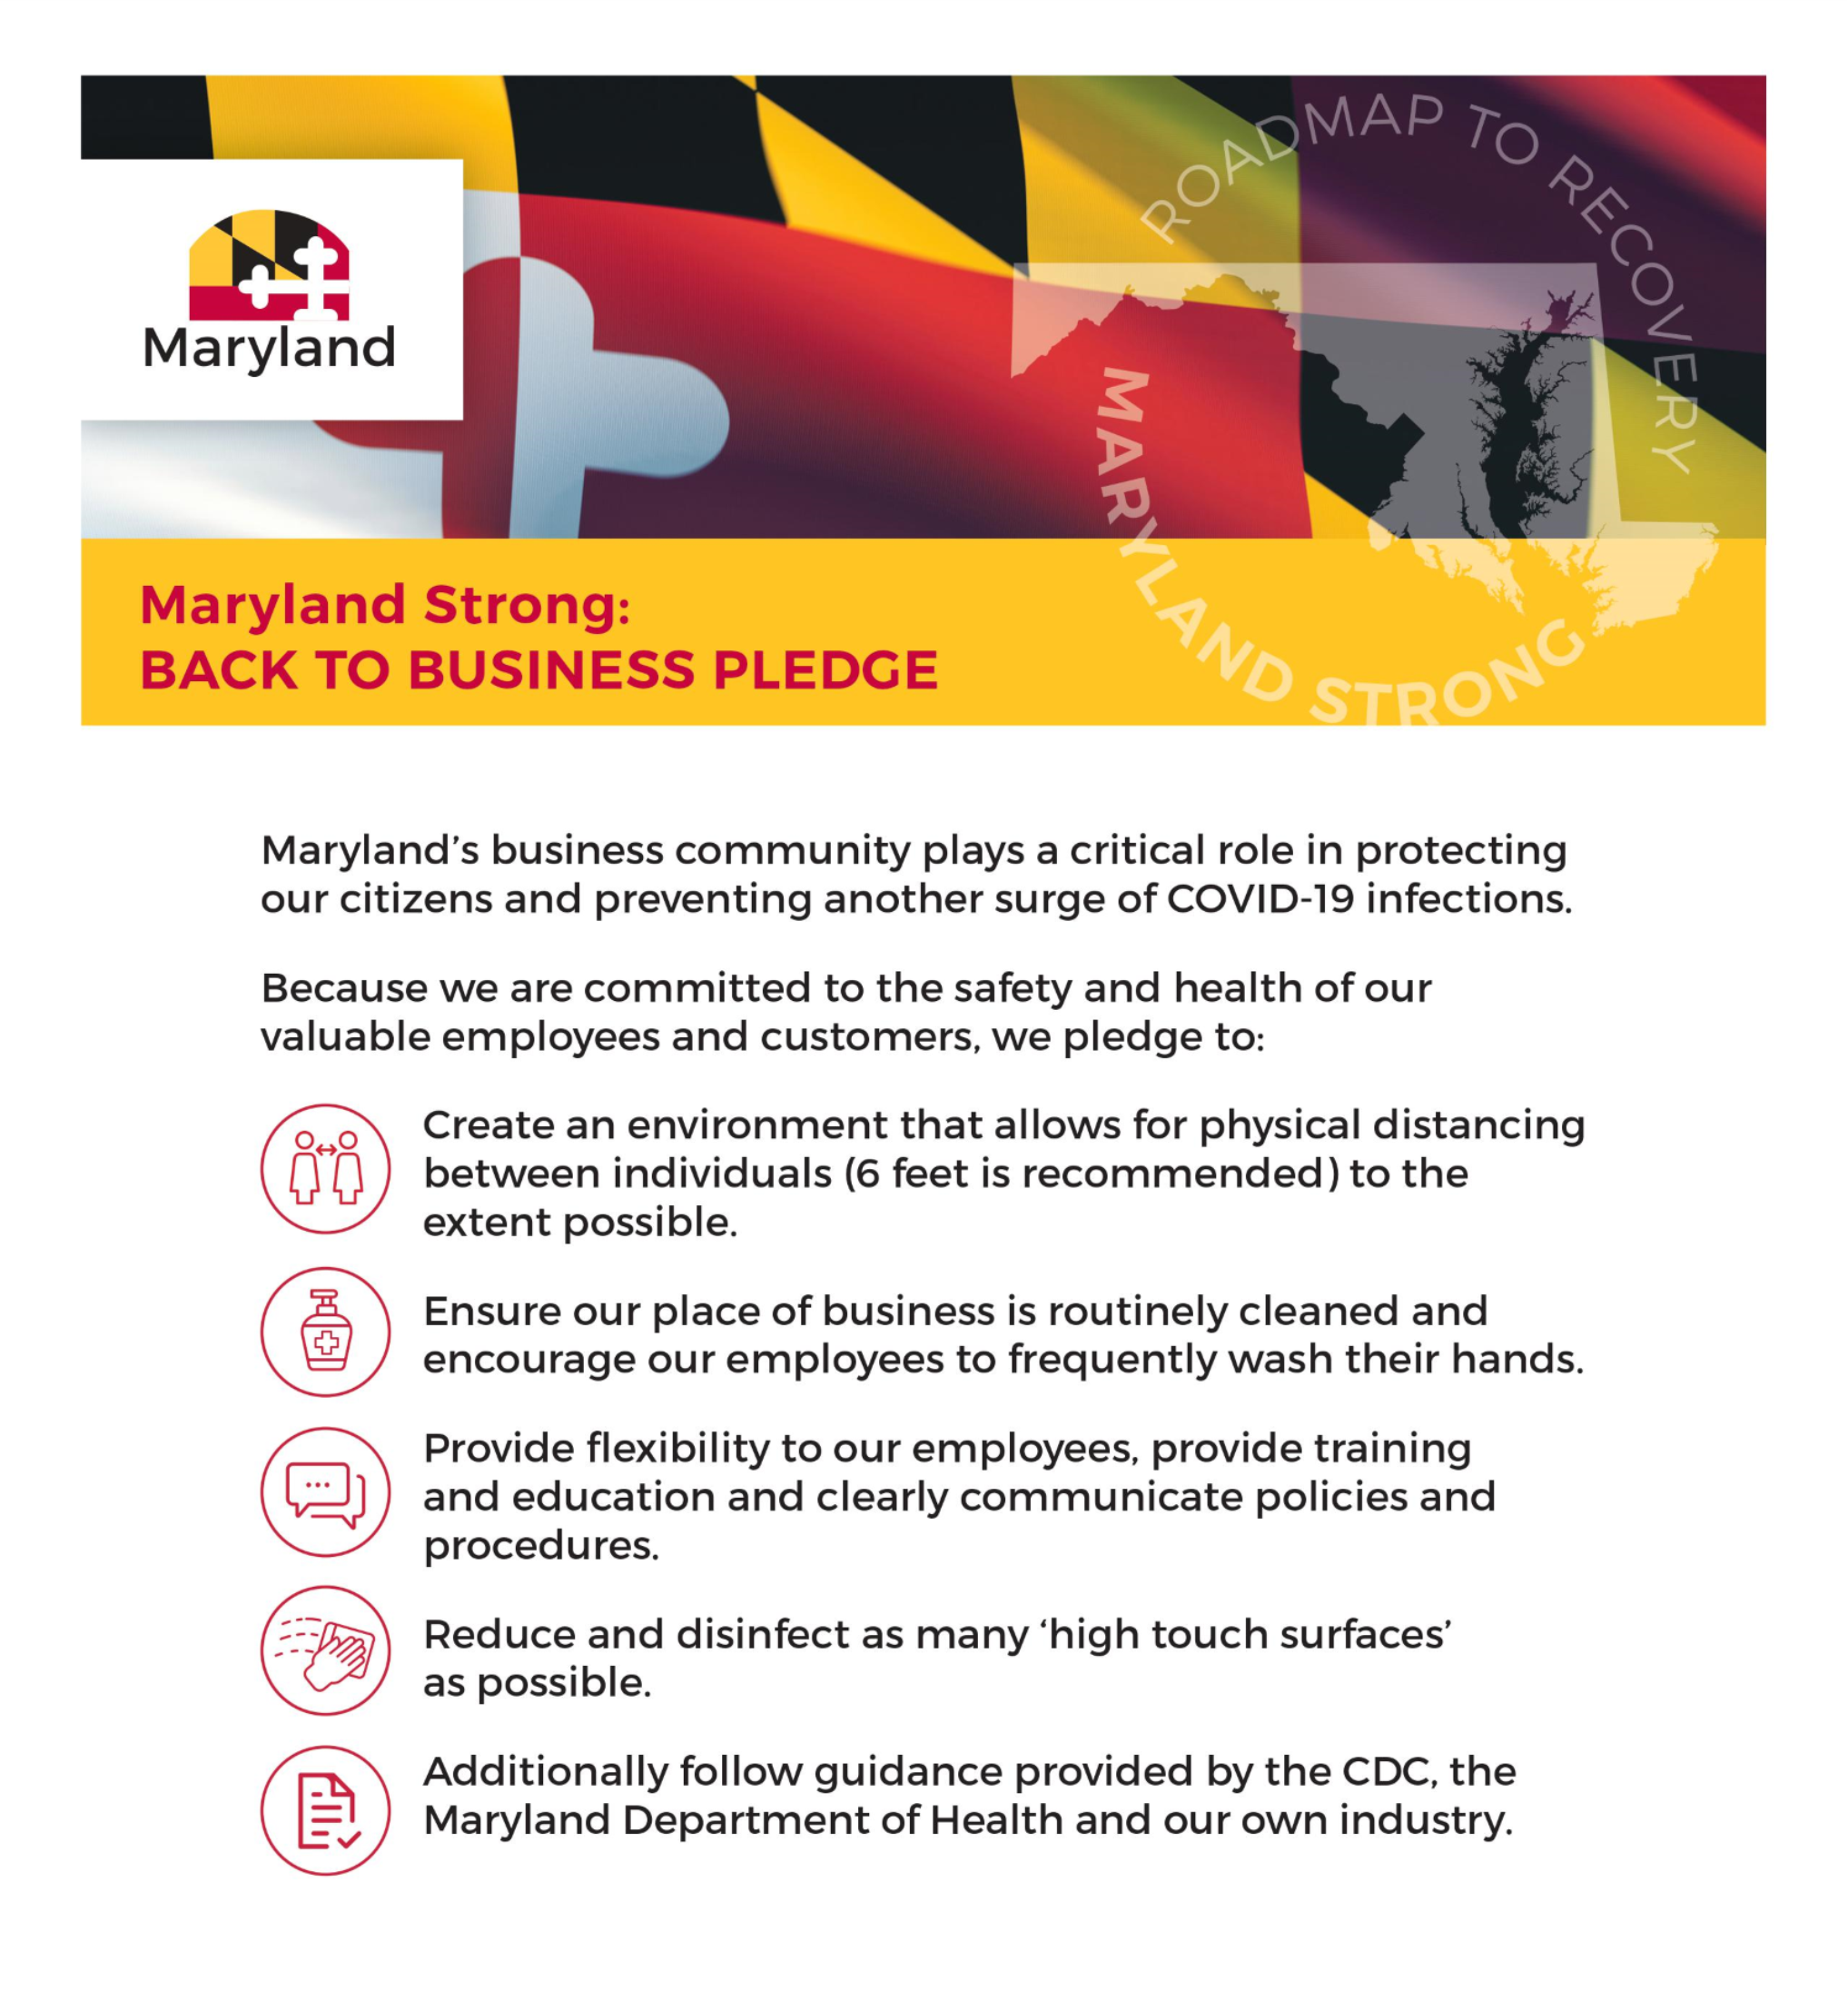 Maryland Strong - Back to Business Pledge